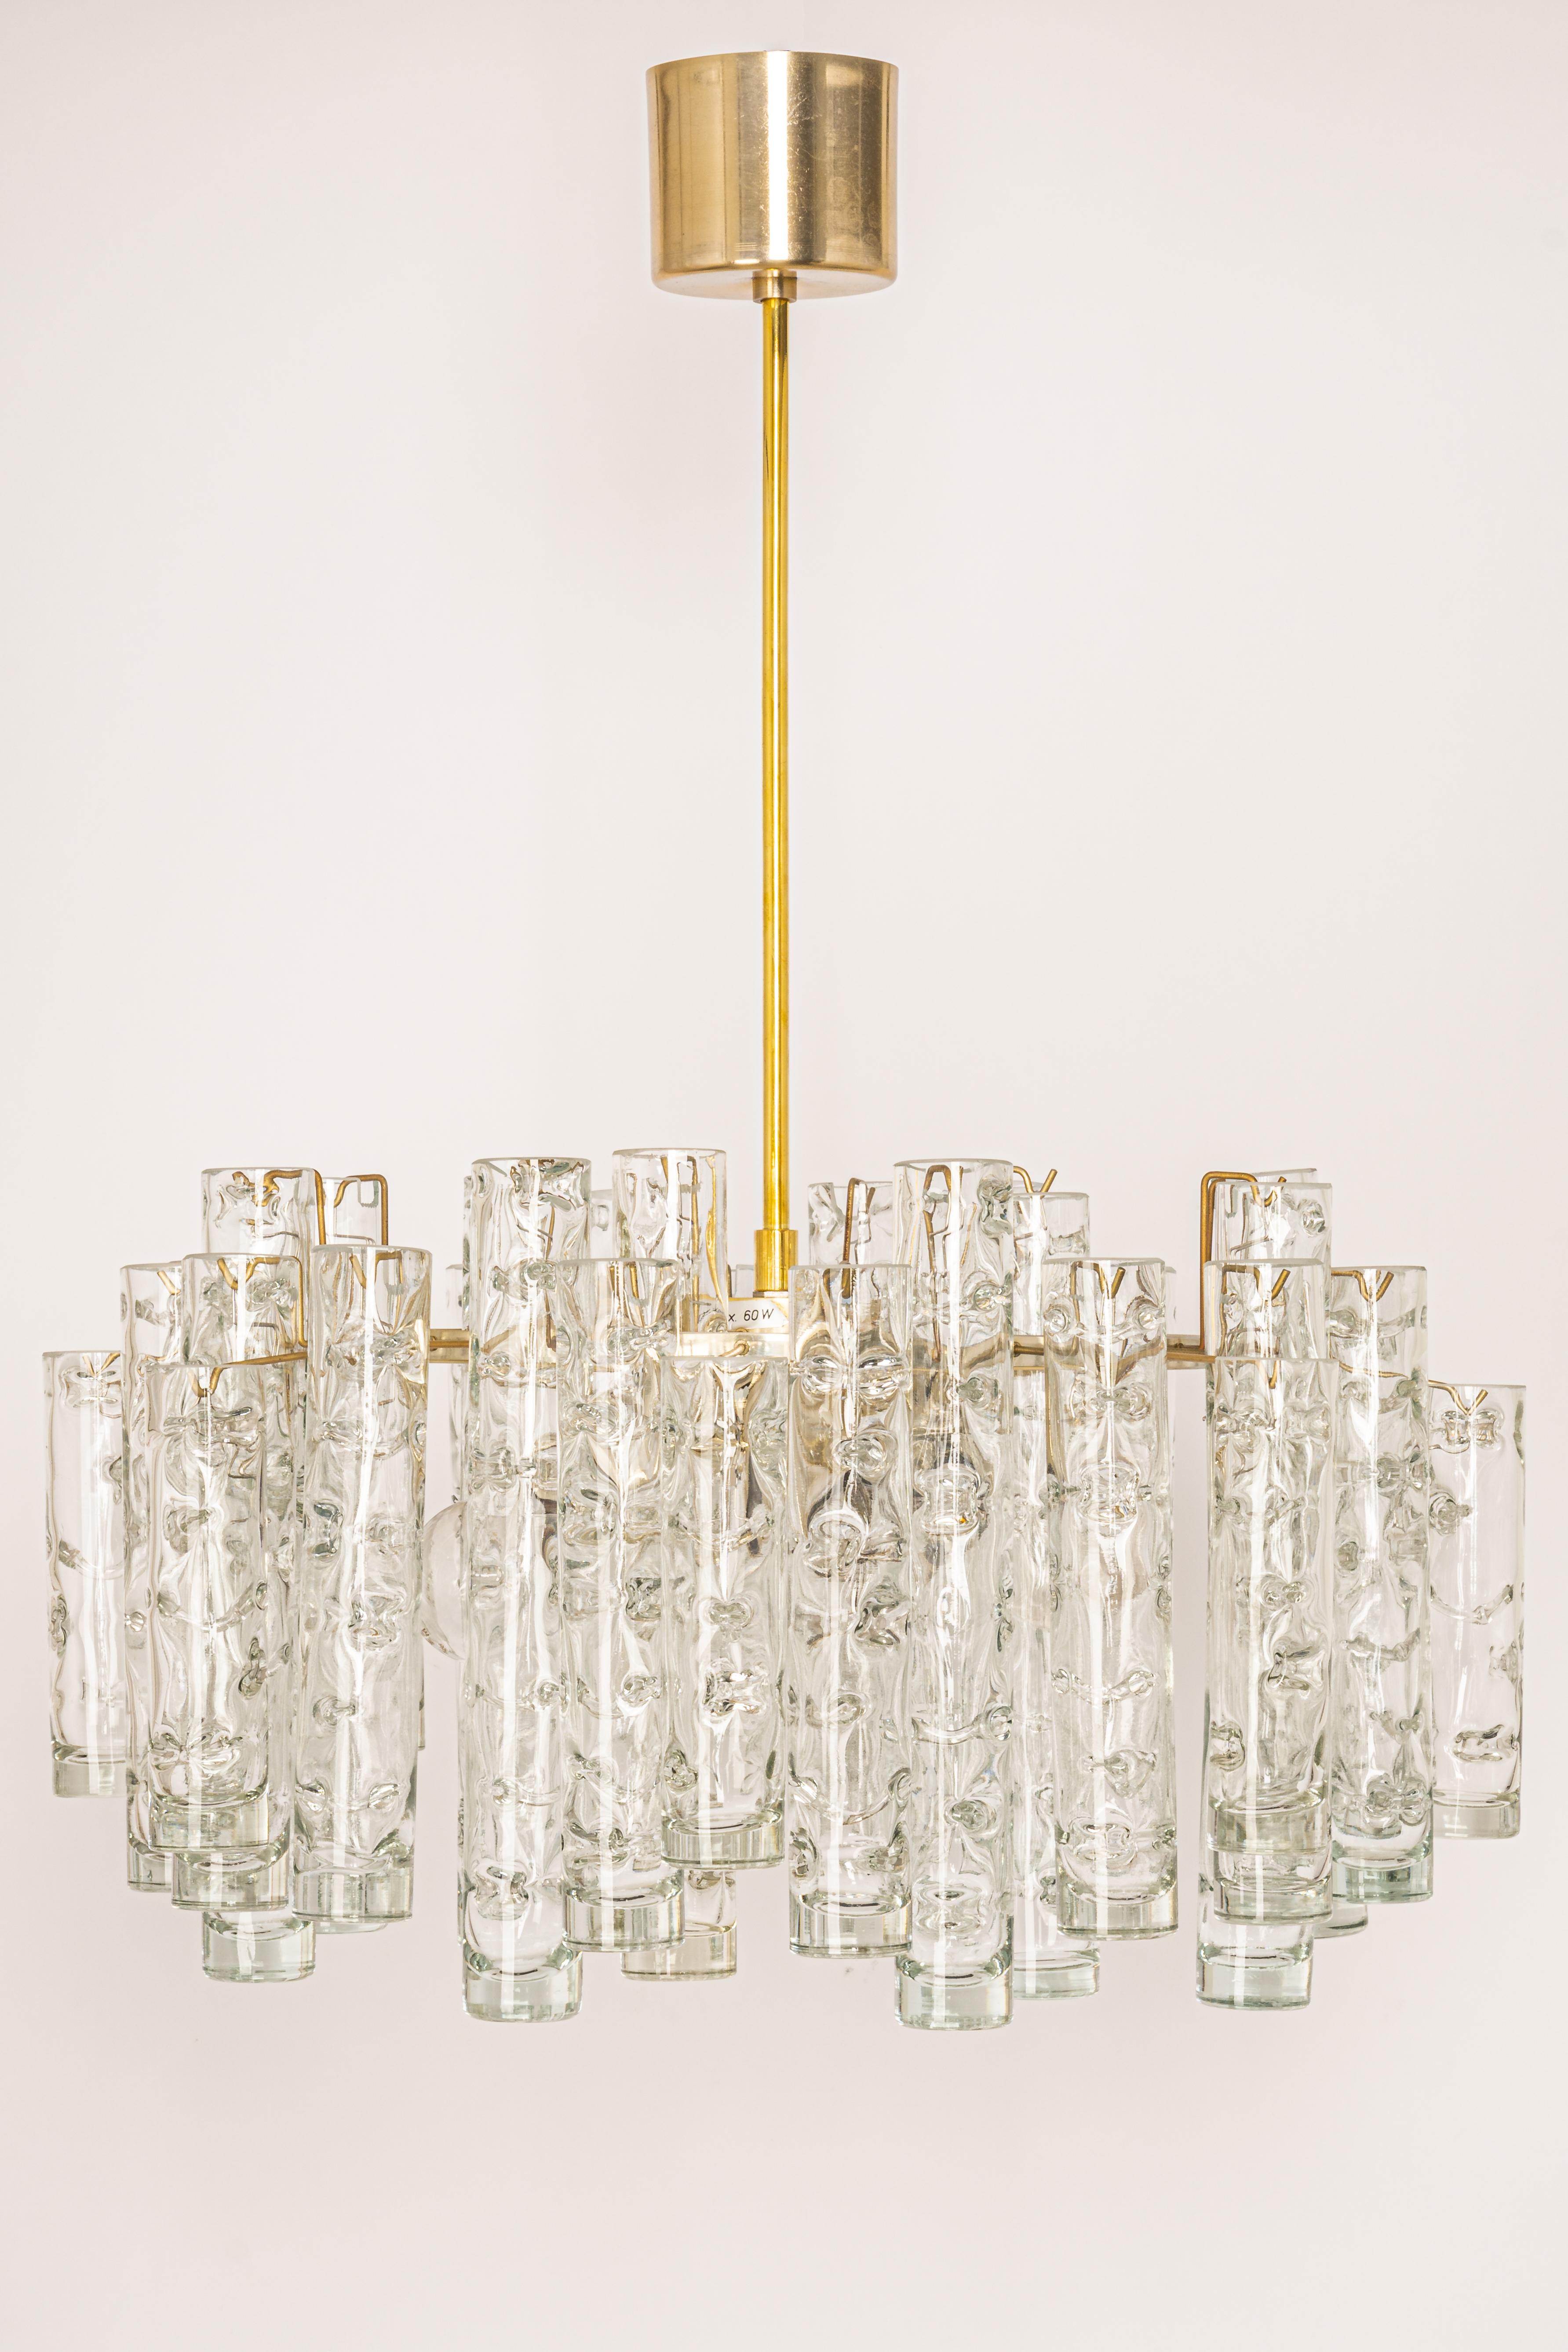 Fantastic mid-century chandelier by Doria, Germany, manufactured circa 1960-1969. A lot of Murano glass cylinders suspended from the fixture.

Heavy quality and in very good condition. Cleaned, well-wired, and ready to use.

The fixture requires